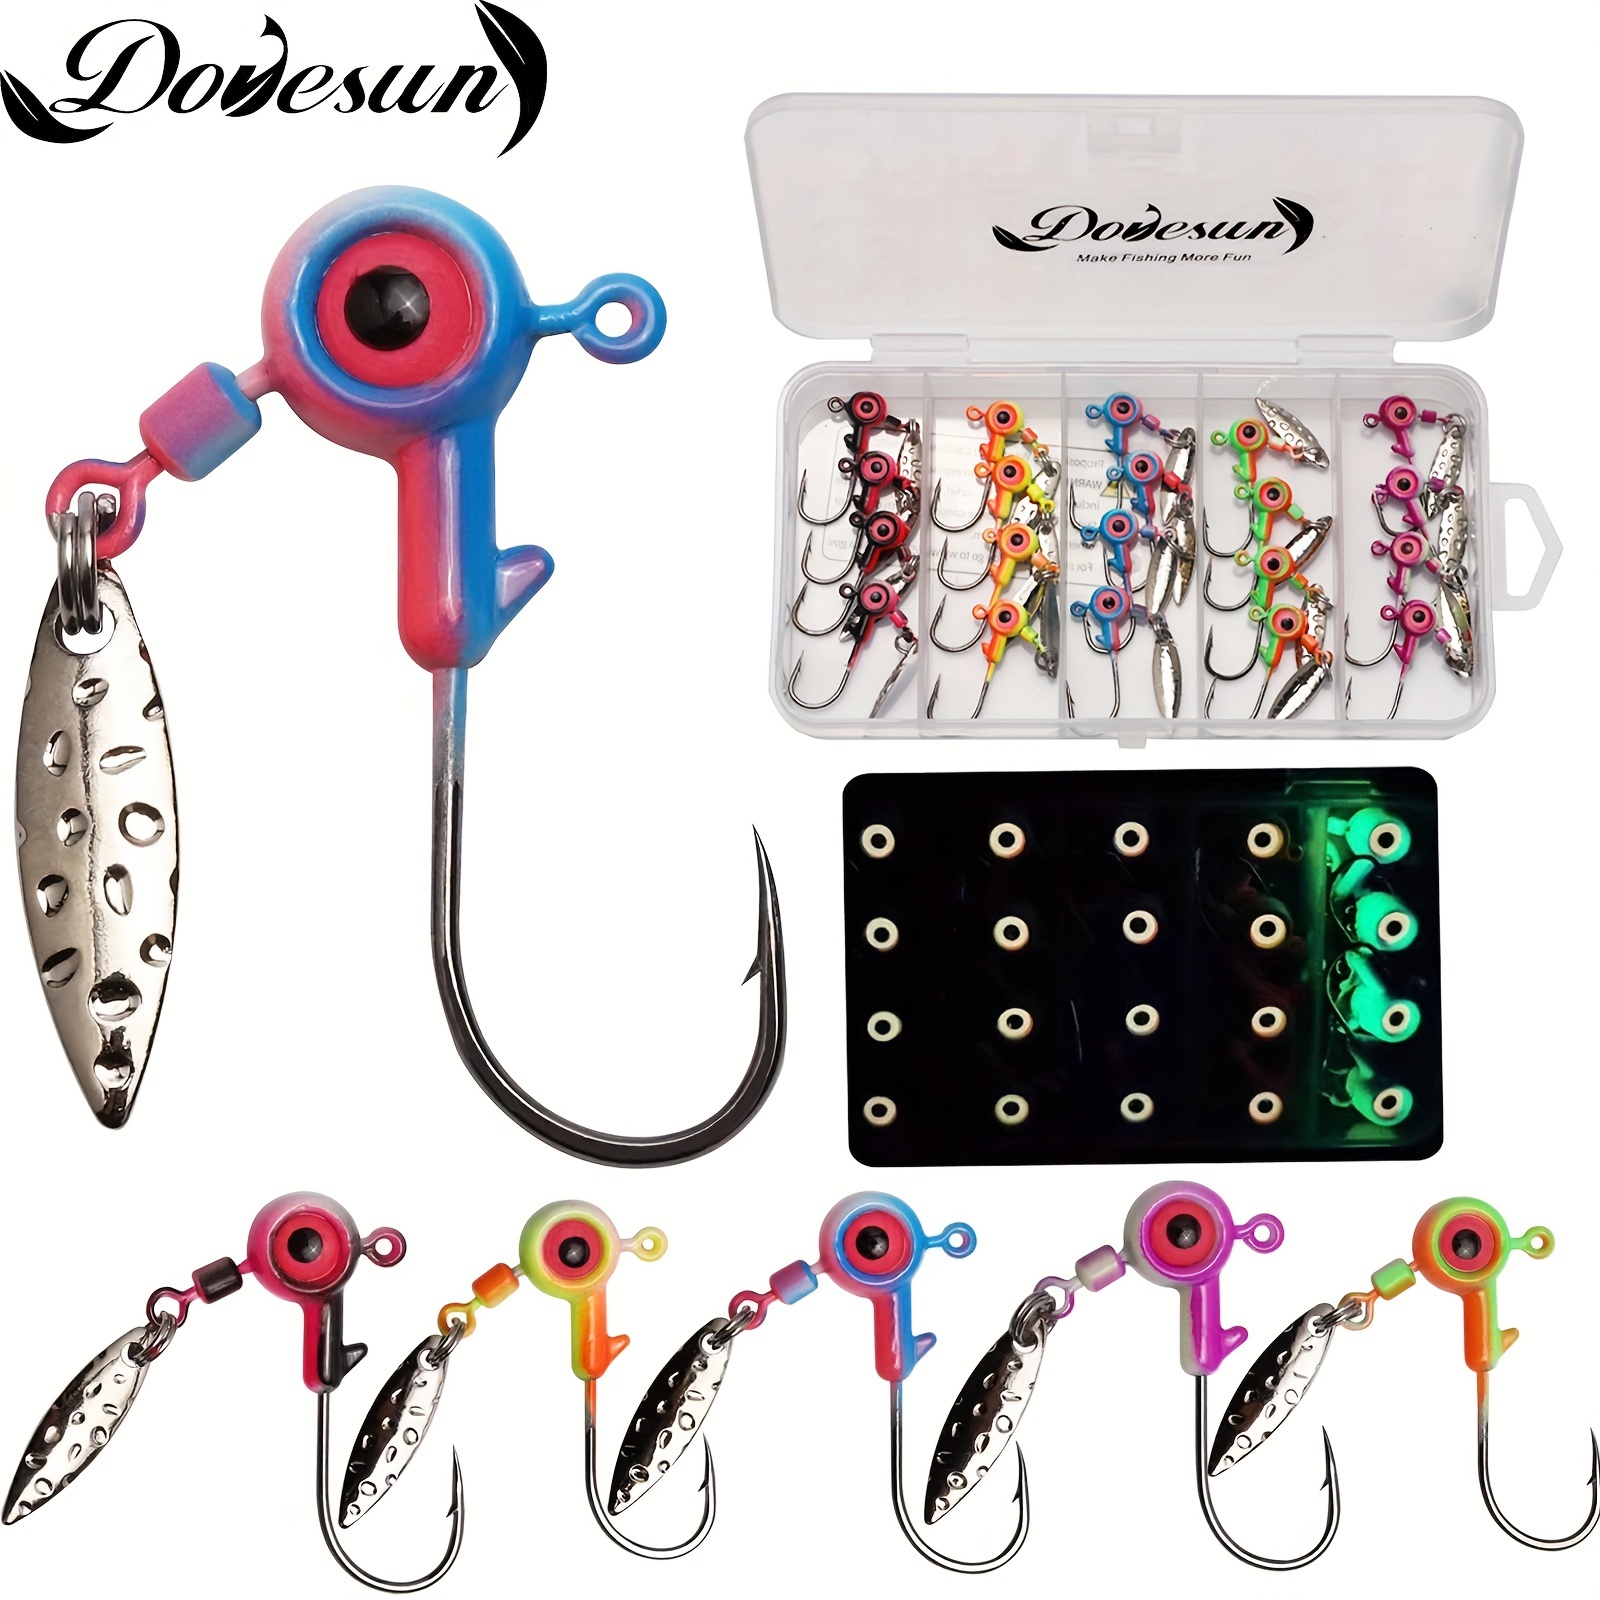 XFISHMAN Crappie-Jig-Heads-Kit-with-Underspin-Jig-Head-Spinner-Blade,  Crappie Lures and Jigs for Crappie Fishing Jigs - 30 & 50 Pack, 1/8